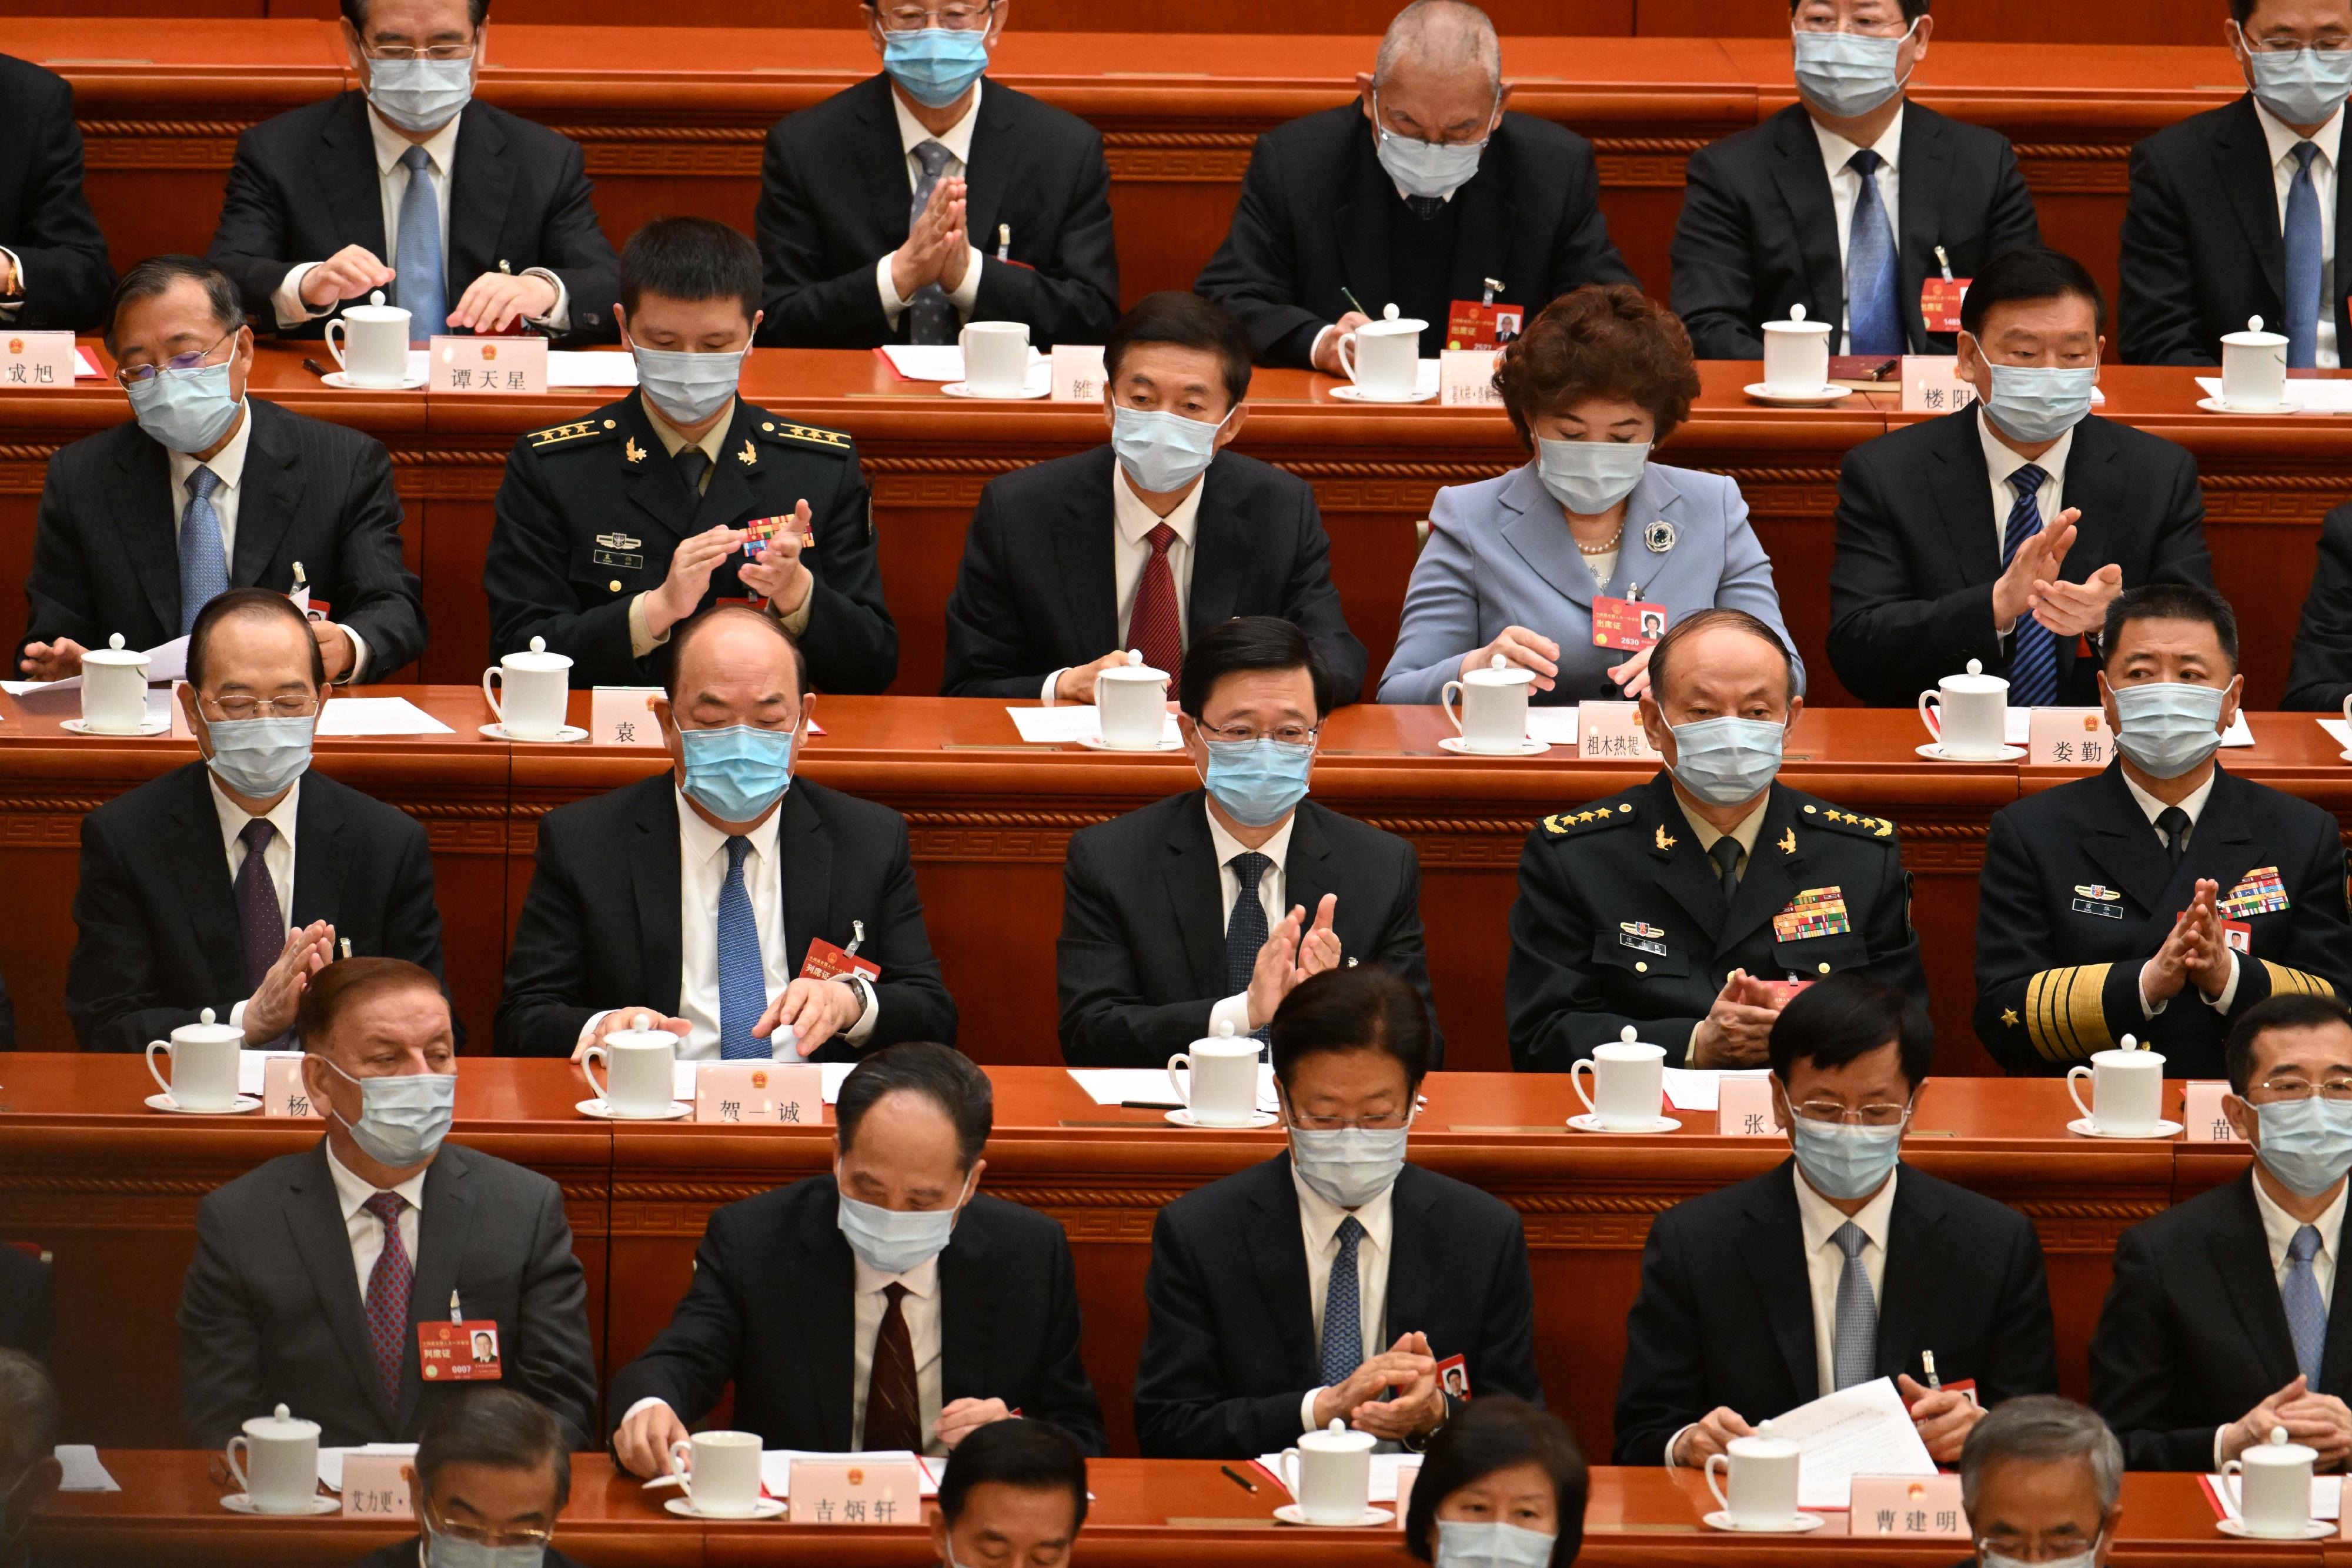 The Chief Executive, Mr John Lee (second row, centre), attends the closing meeting of the first session of the 14th National People's Congress in Beijing this morning (March 13).
